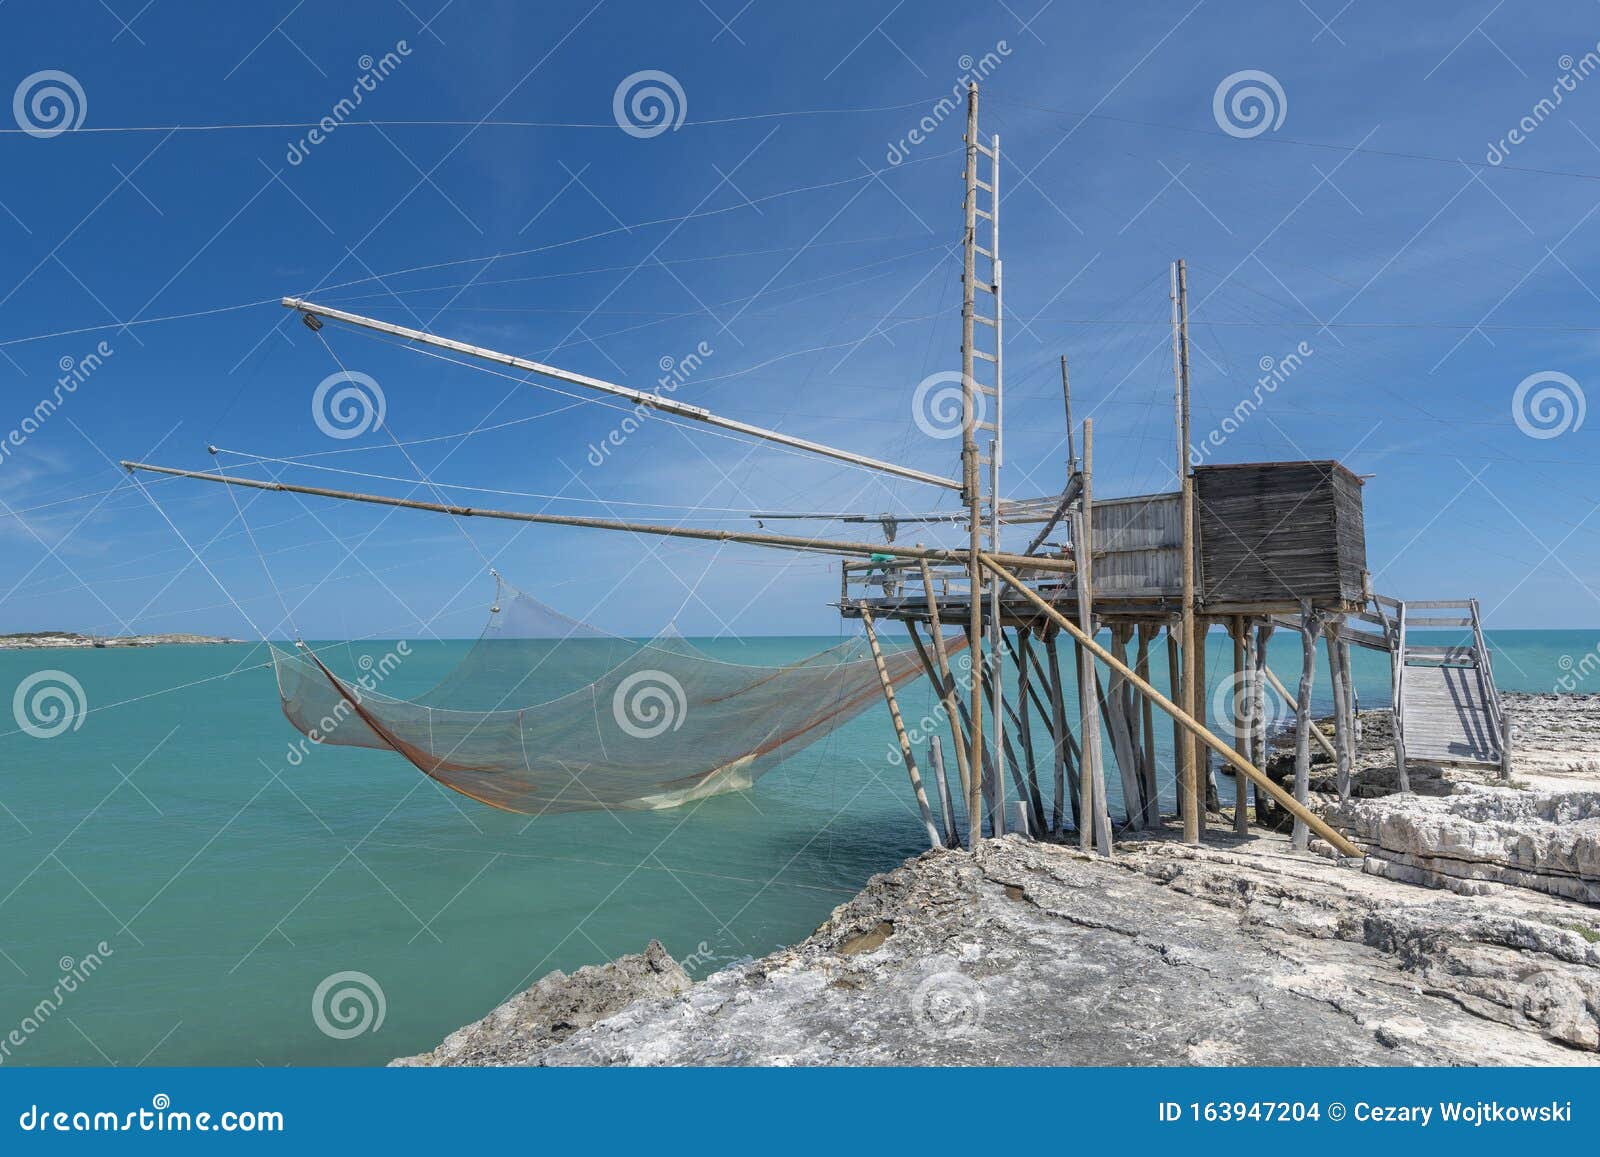 Typical Traditional Fishing Trabucco at the Beach of Vieste Along the ...